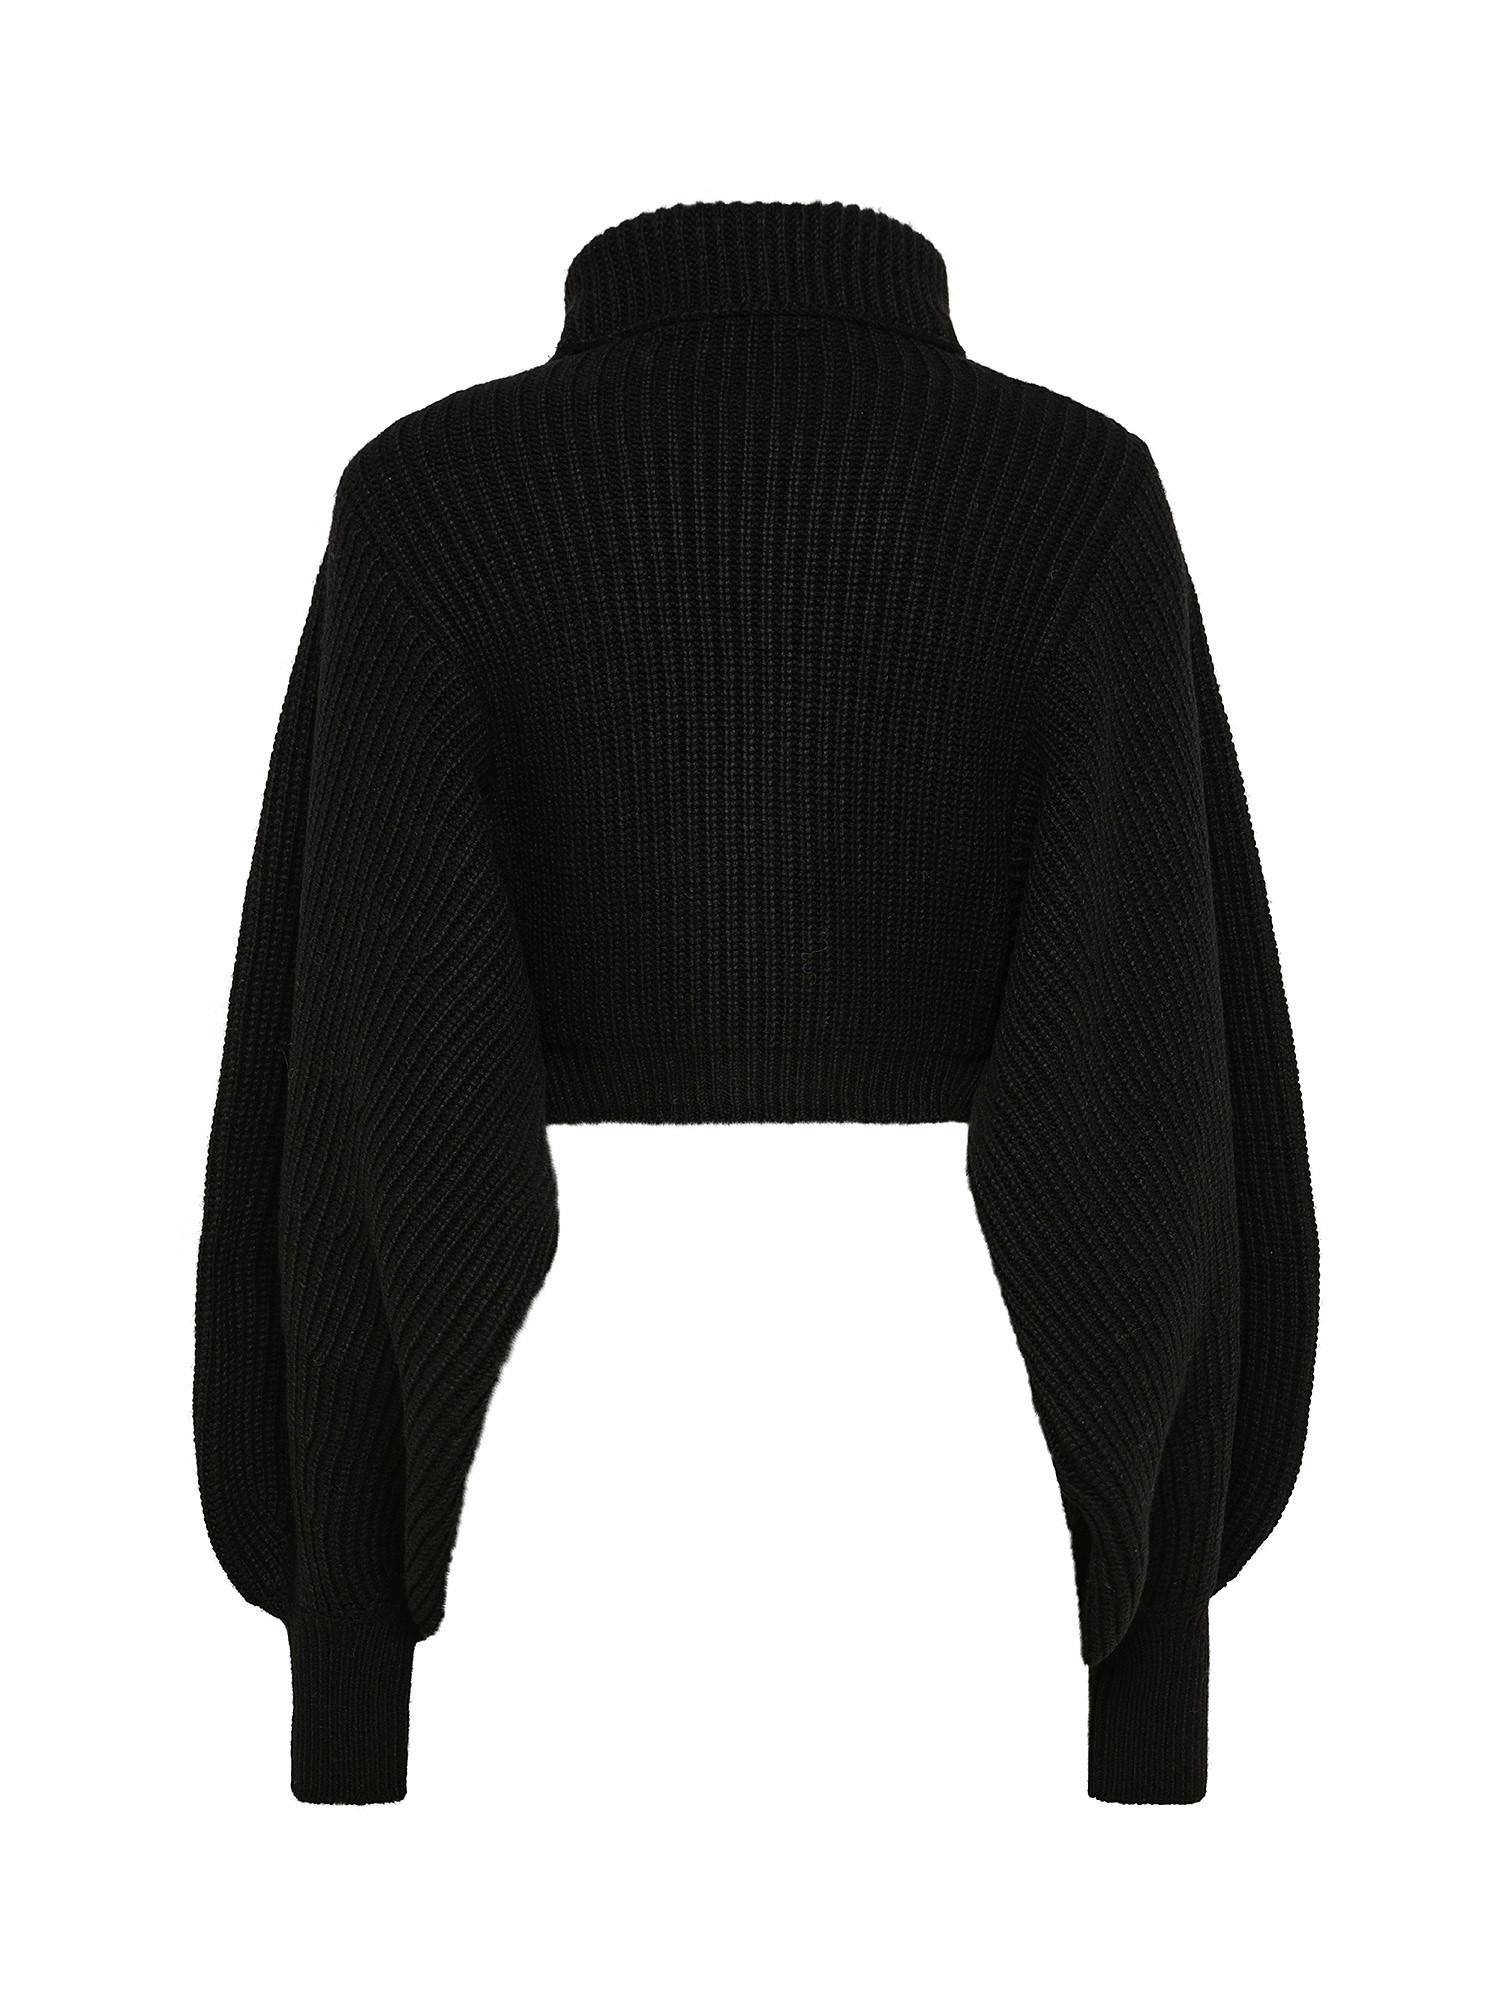 Maglia cropped oversized in misto lana a coste, Nero, large image number 1